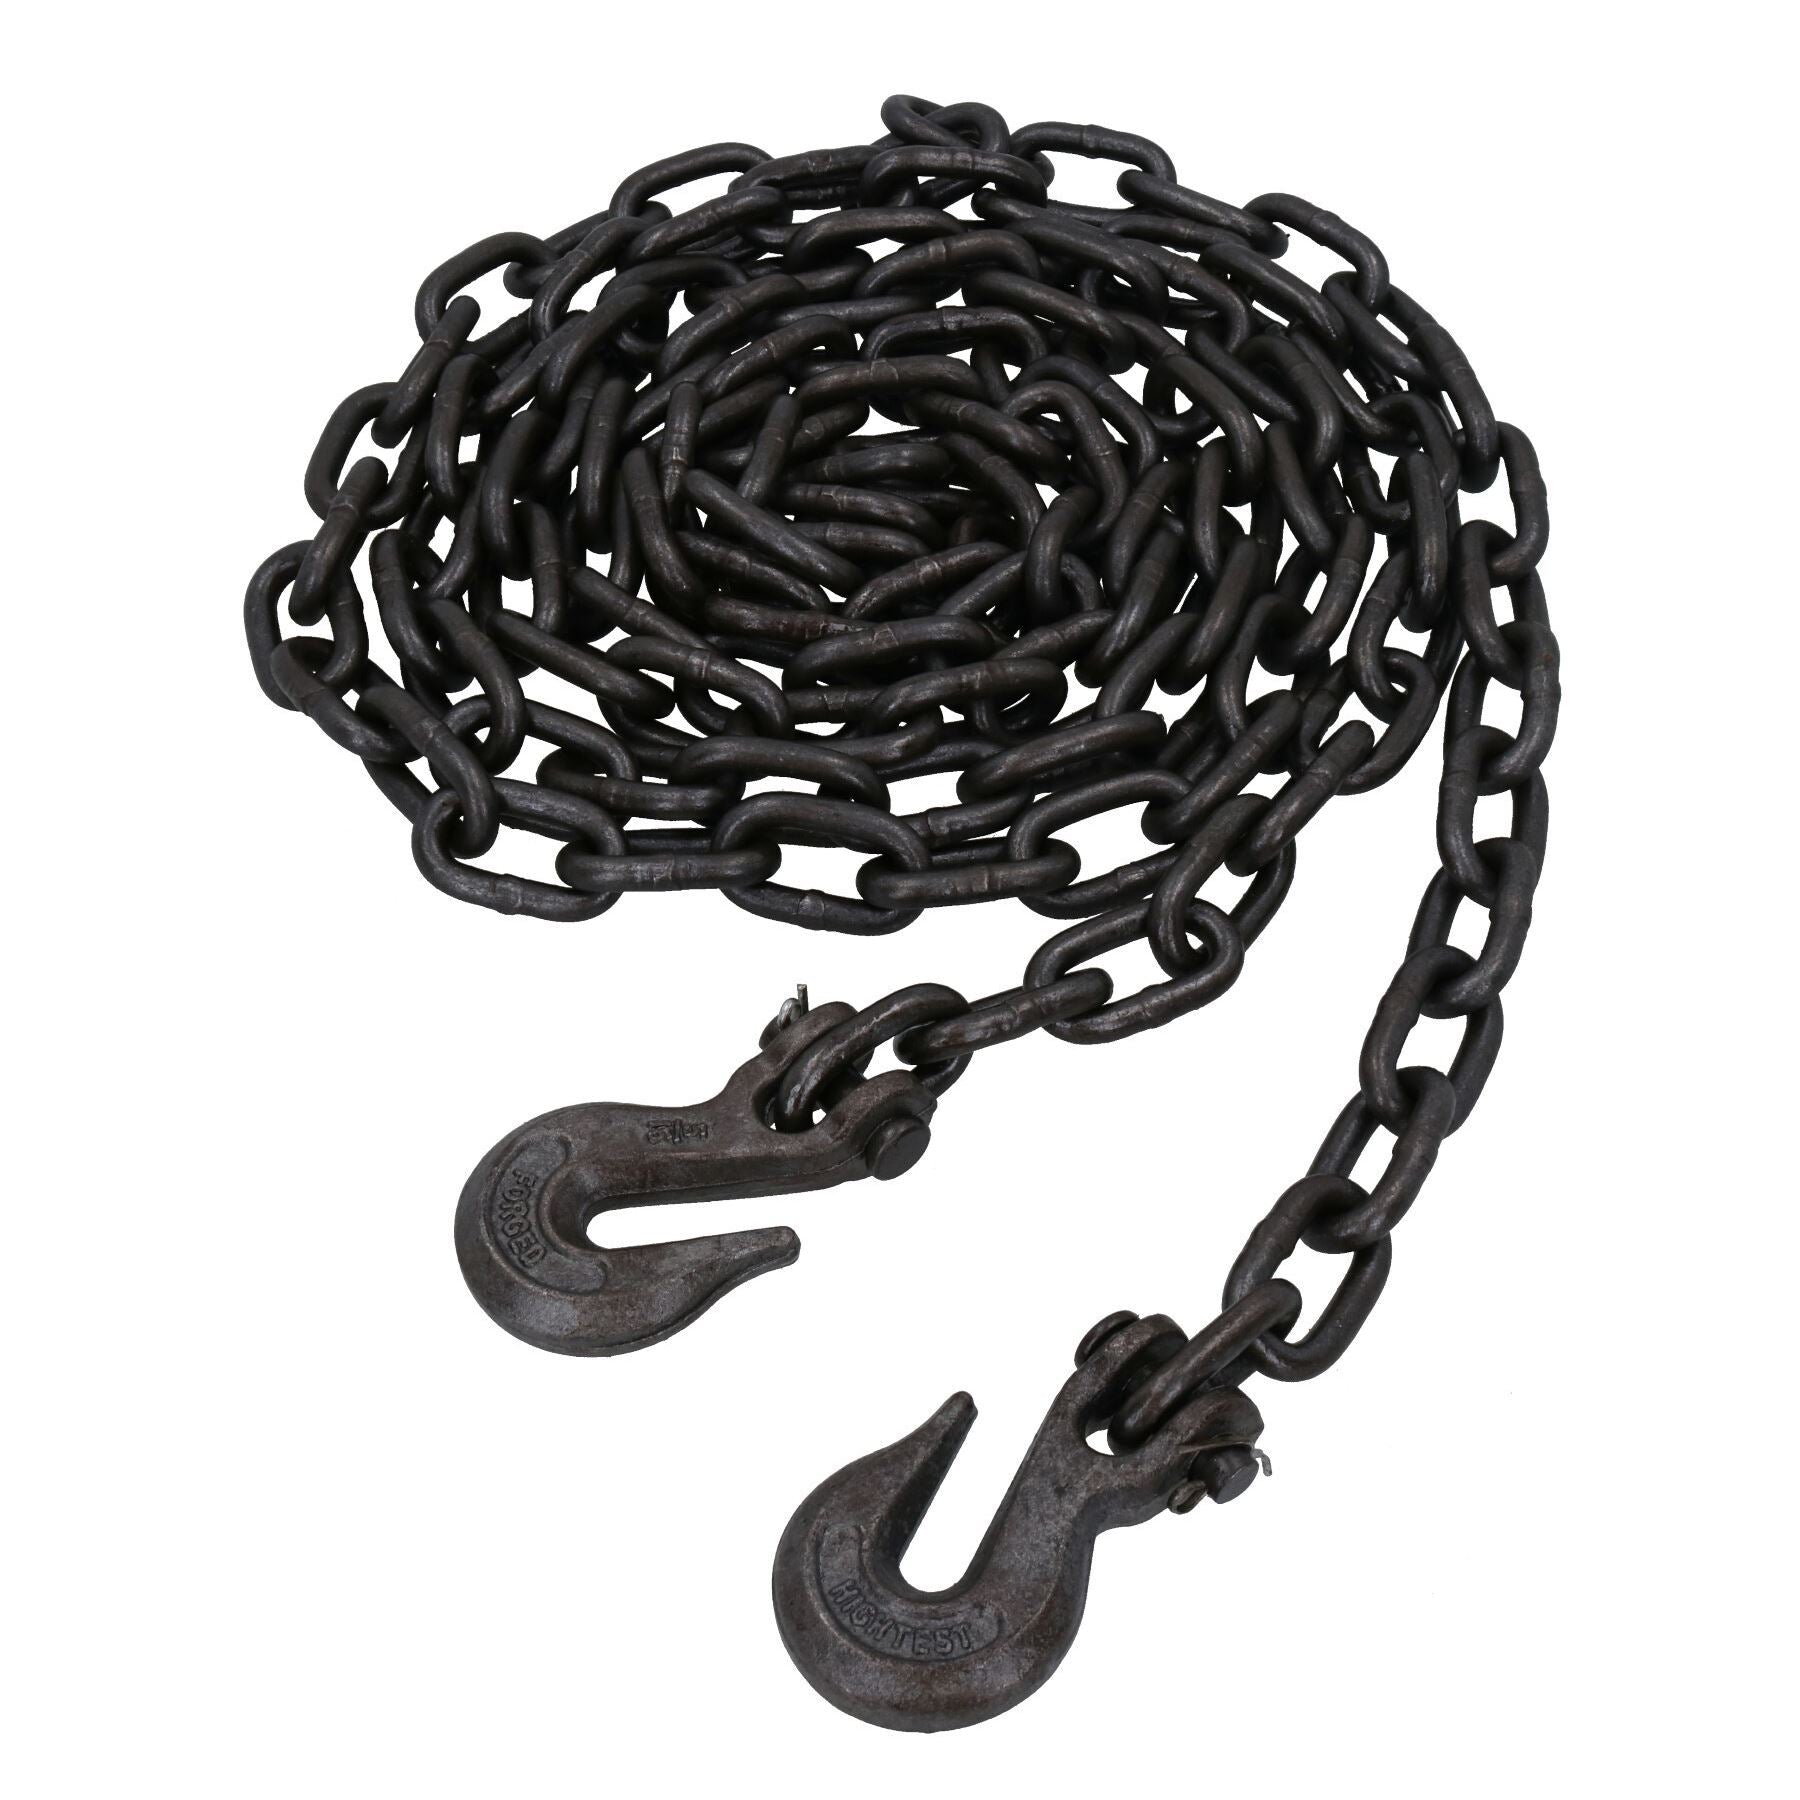 4mtr 8mm Tow Towing Recovery Chain Grab Hooks 1770kg Working Load + Case